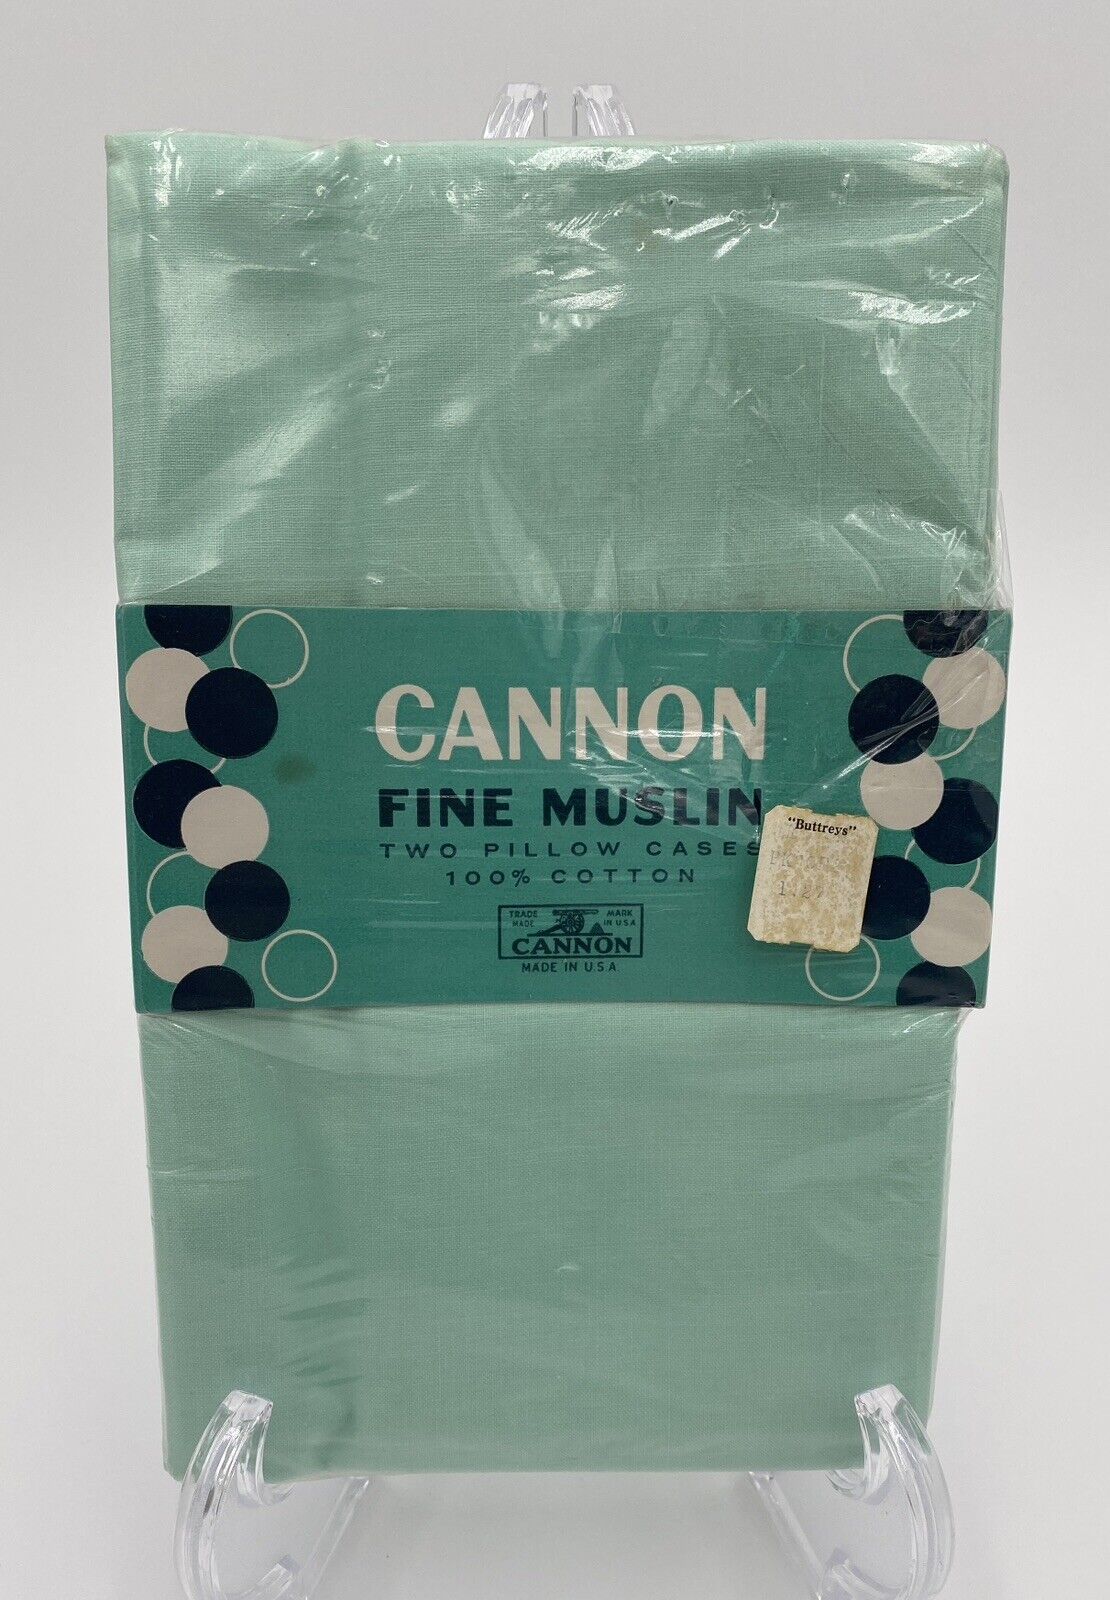 1960’s CANNON Fine Muslin 2 Pillowcases 45x36 Green 100% Cotton Made In U.S.A.